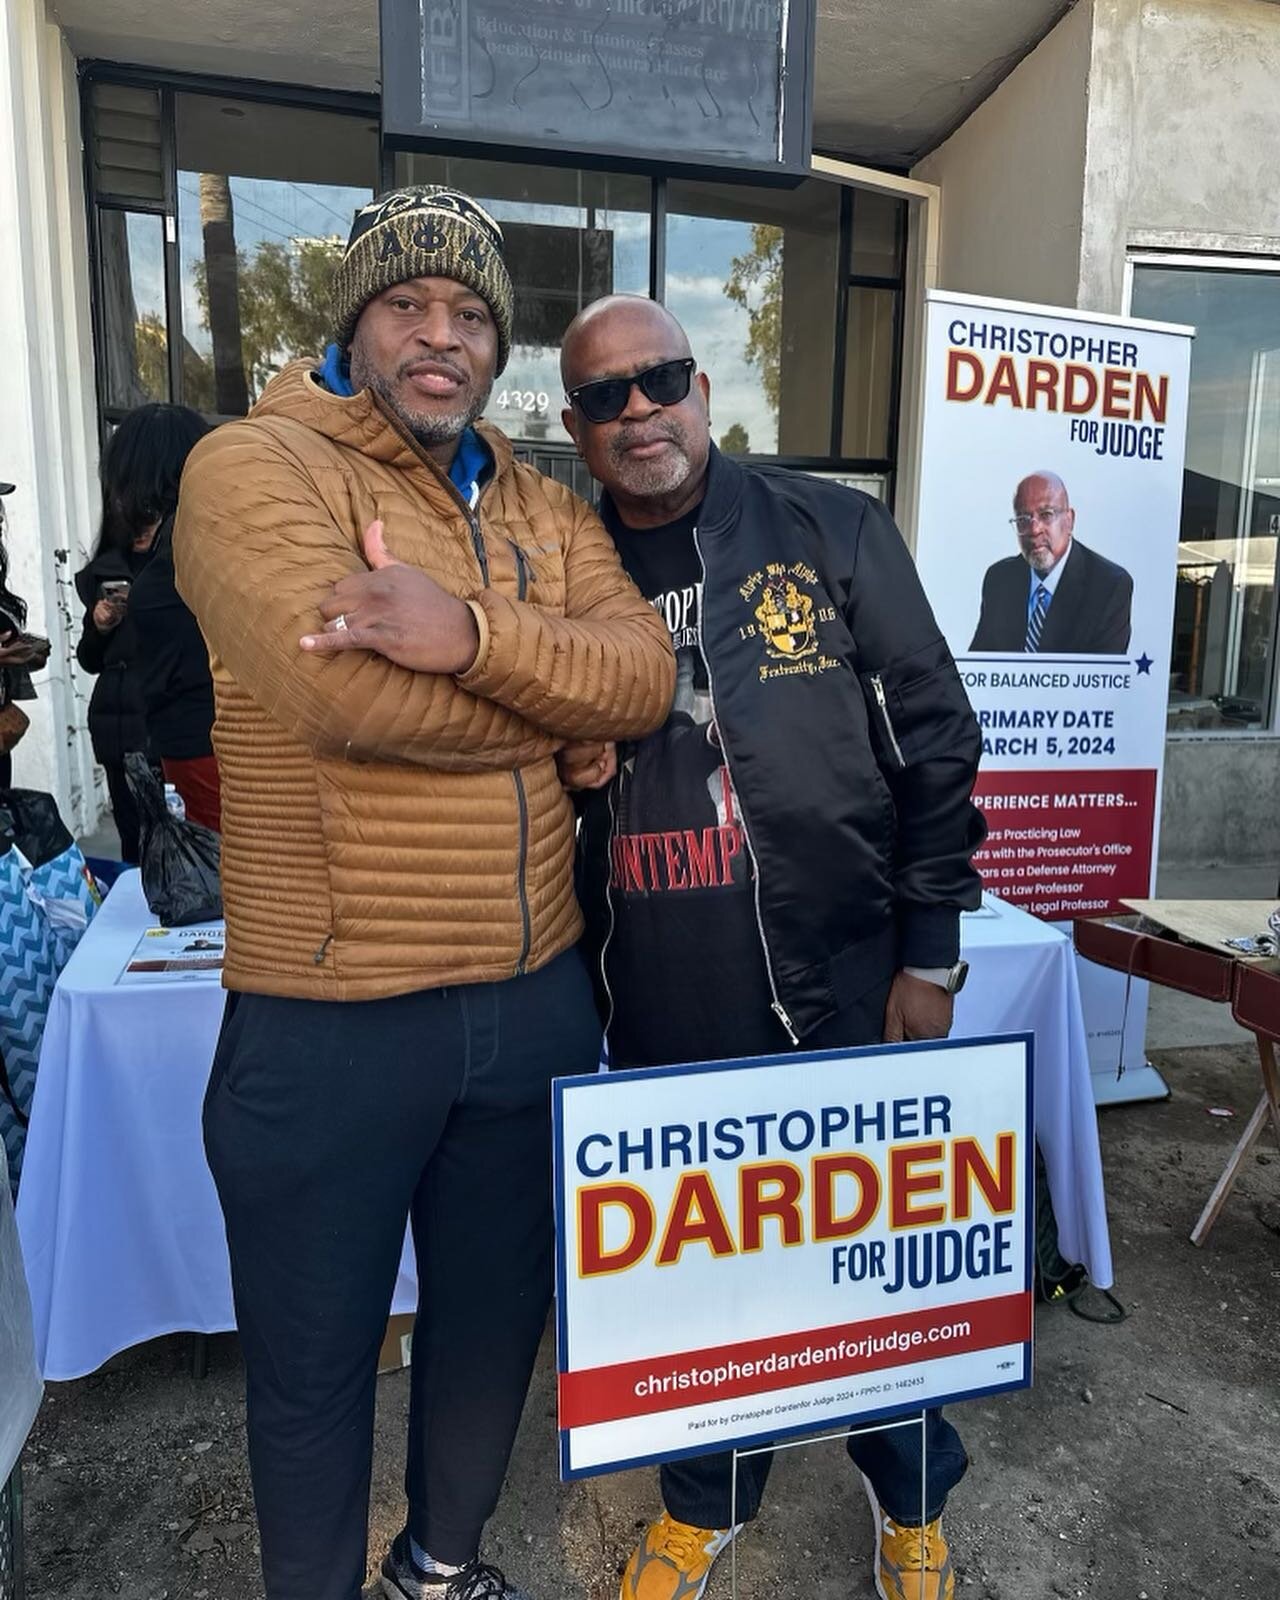 Out there working for every vote! 

#christopherdardenforjudge #getoutthevote #gotv #votedarden #voteforme #experiencematters #morequalified #seat130